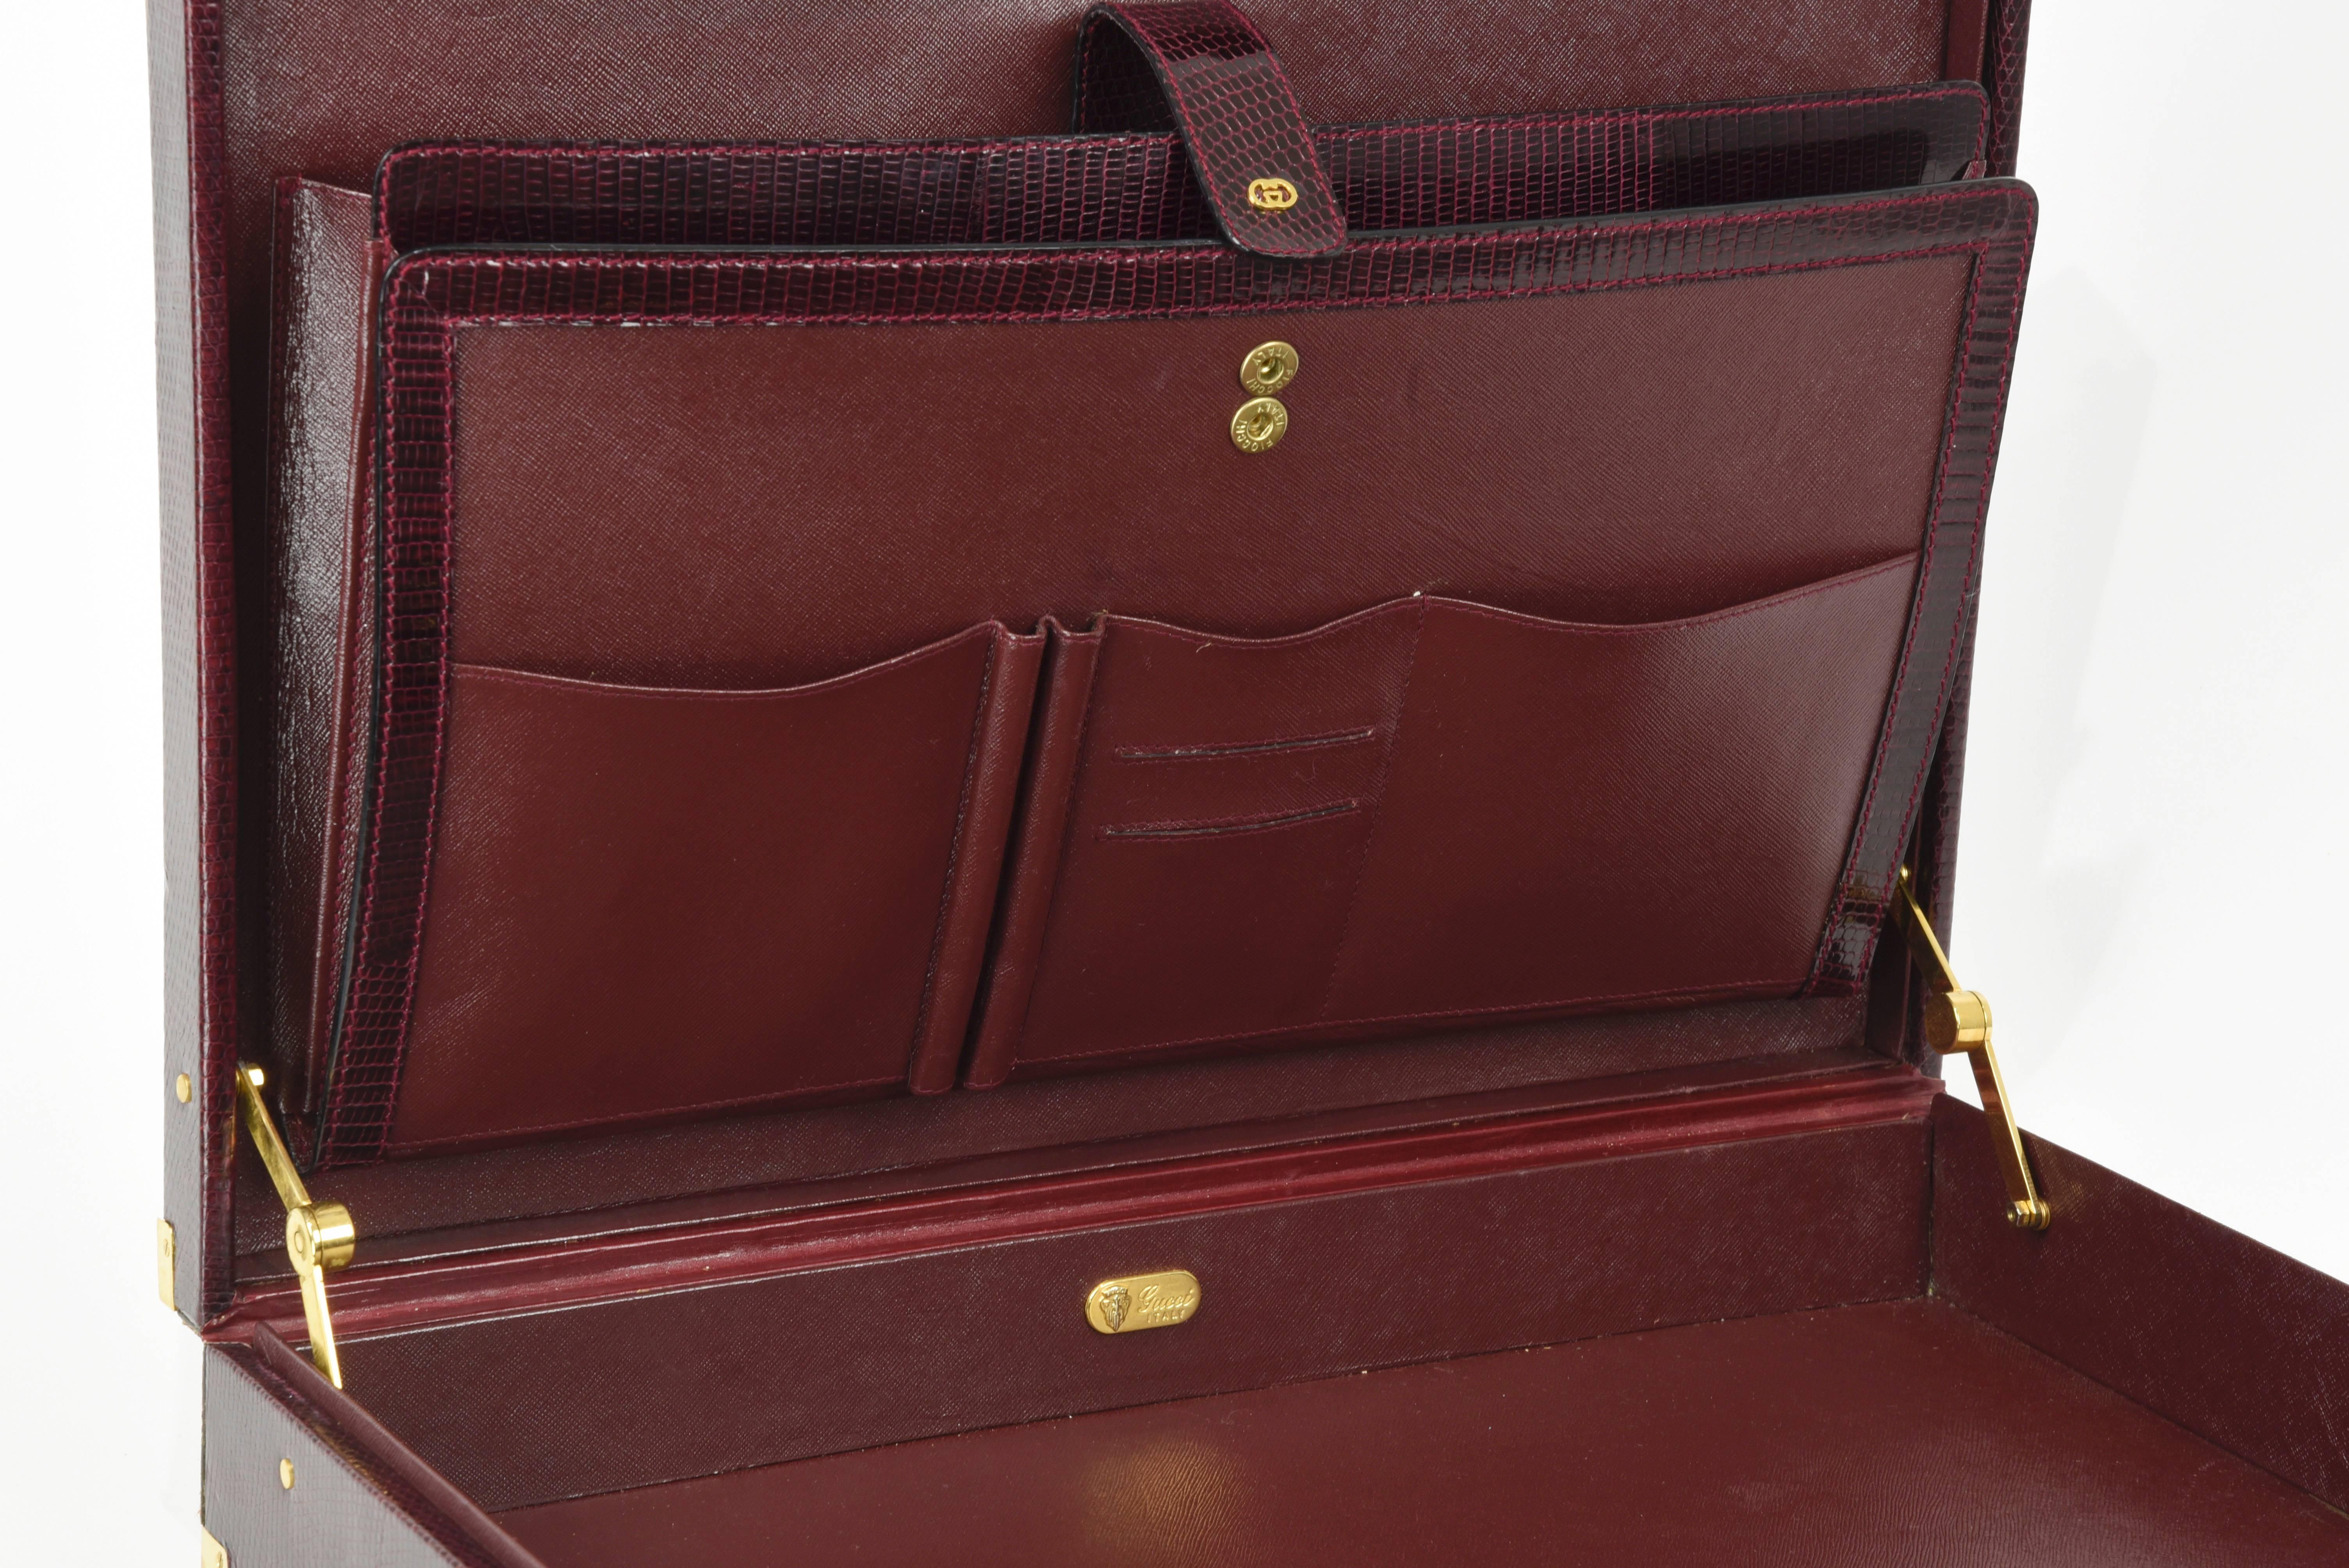 2000s Gucci Burgundy Lizard Briefcase, Gold Hardware and Locks, Great Condition For Sale 5